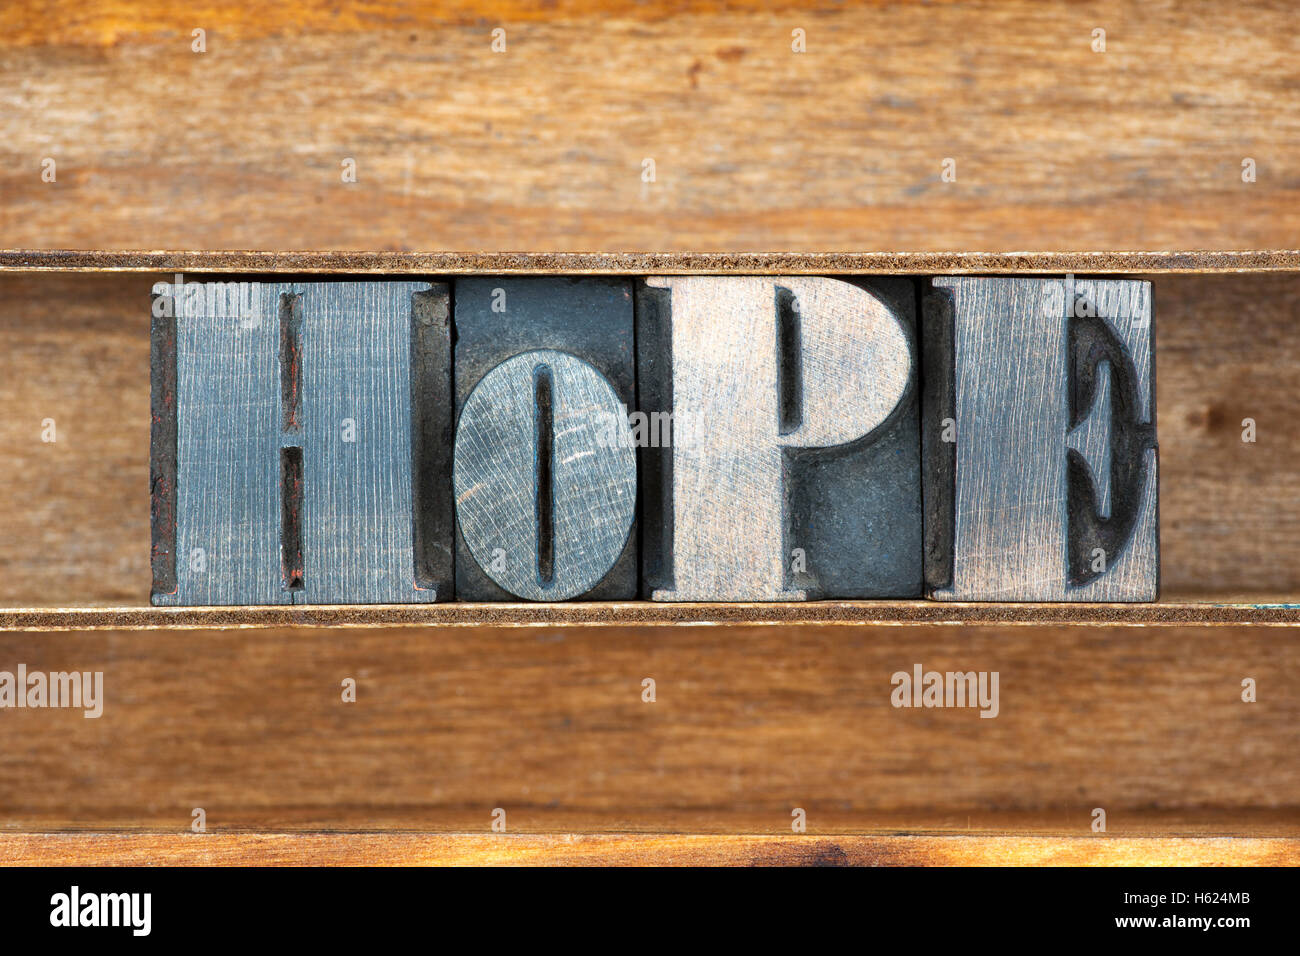 hope word made from vintage letterpress type on wooden tray Stock Photo